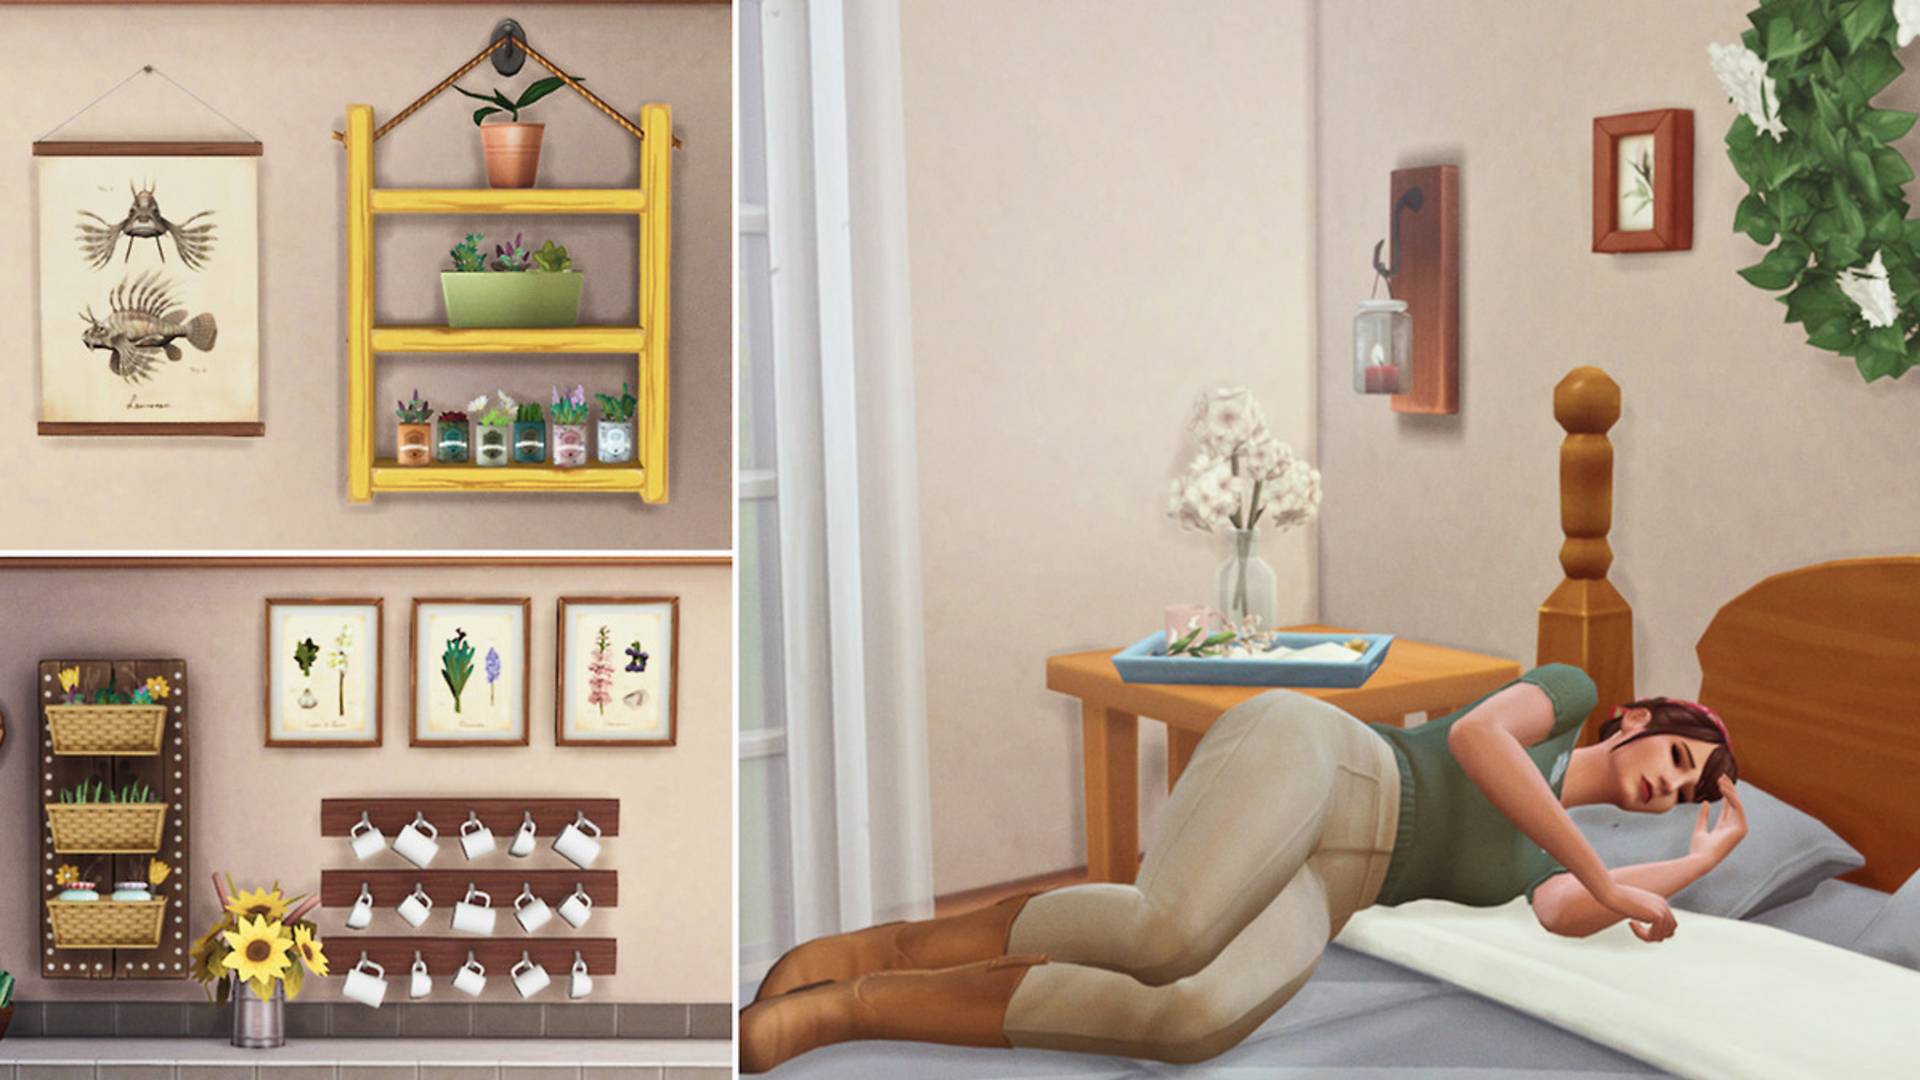 Sims 4 CC: Custom content including photo frames, lunch tray, floating mug holder, and flower boxes.